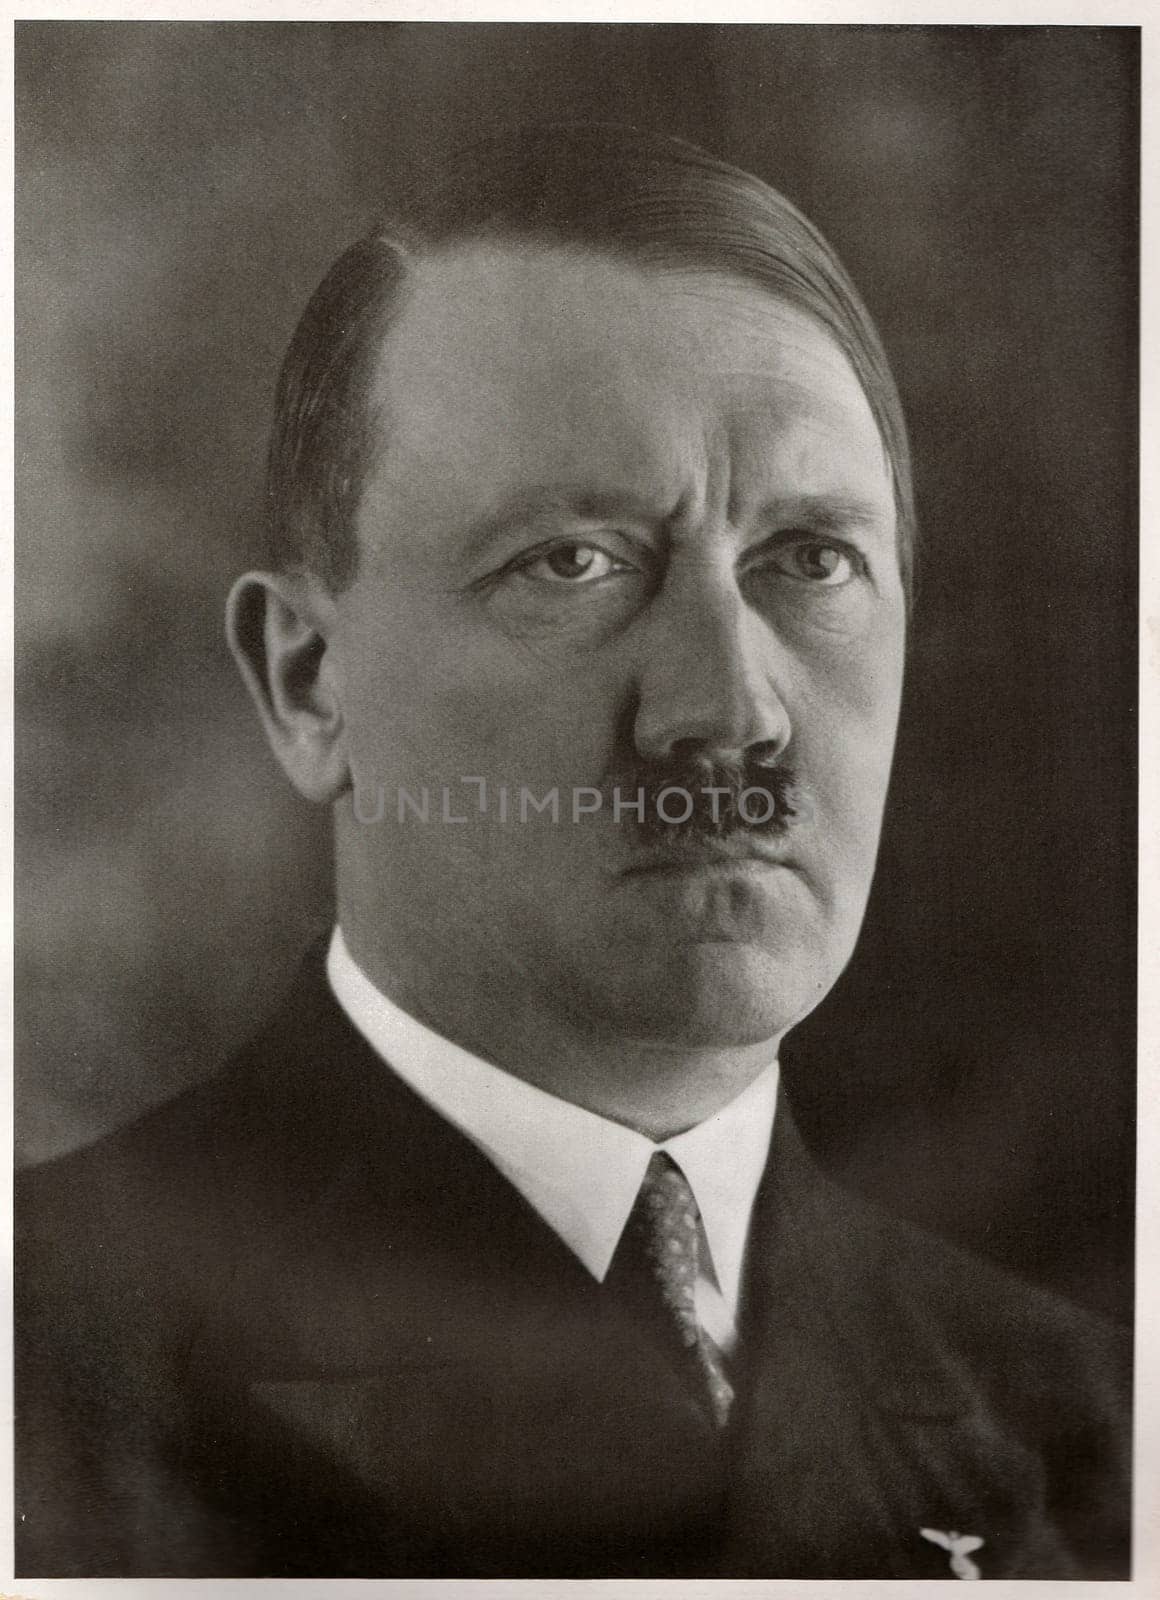 GERMANY - 1936: Studio portrait of Adolf Hitler, leader of nazi Germany. Reproduction of antique photo.